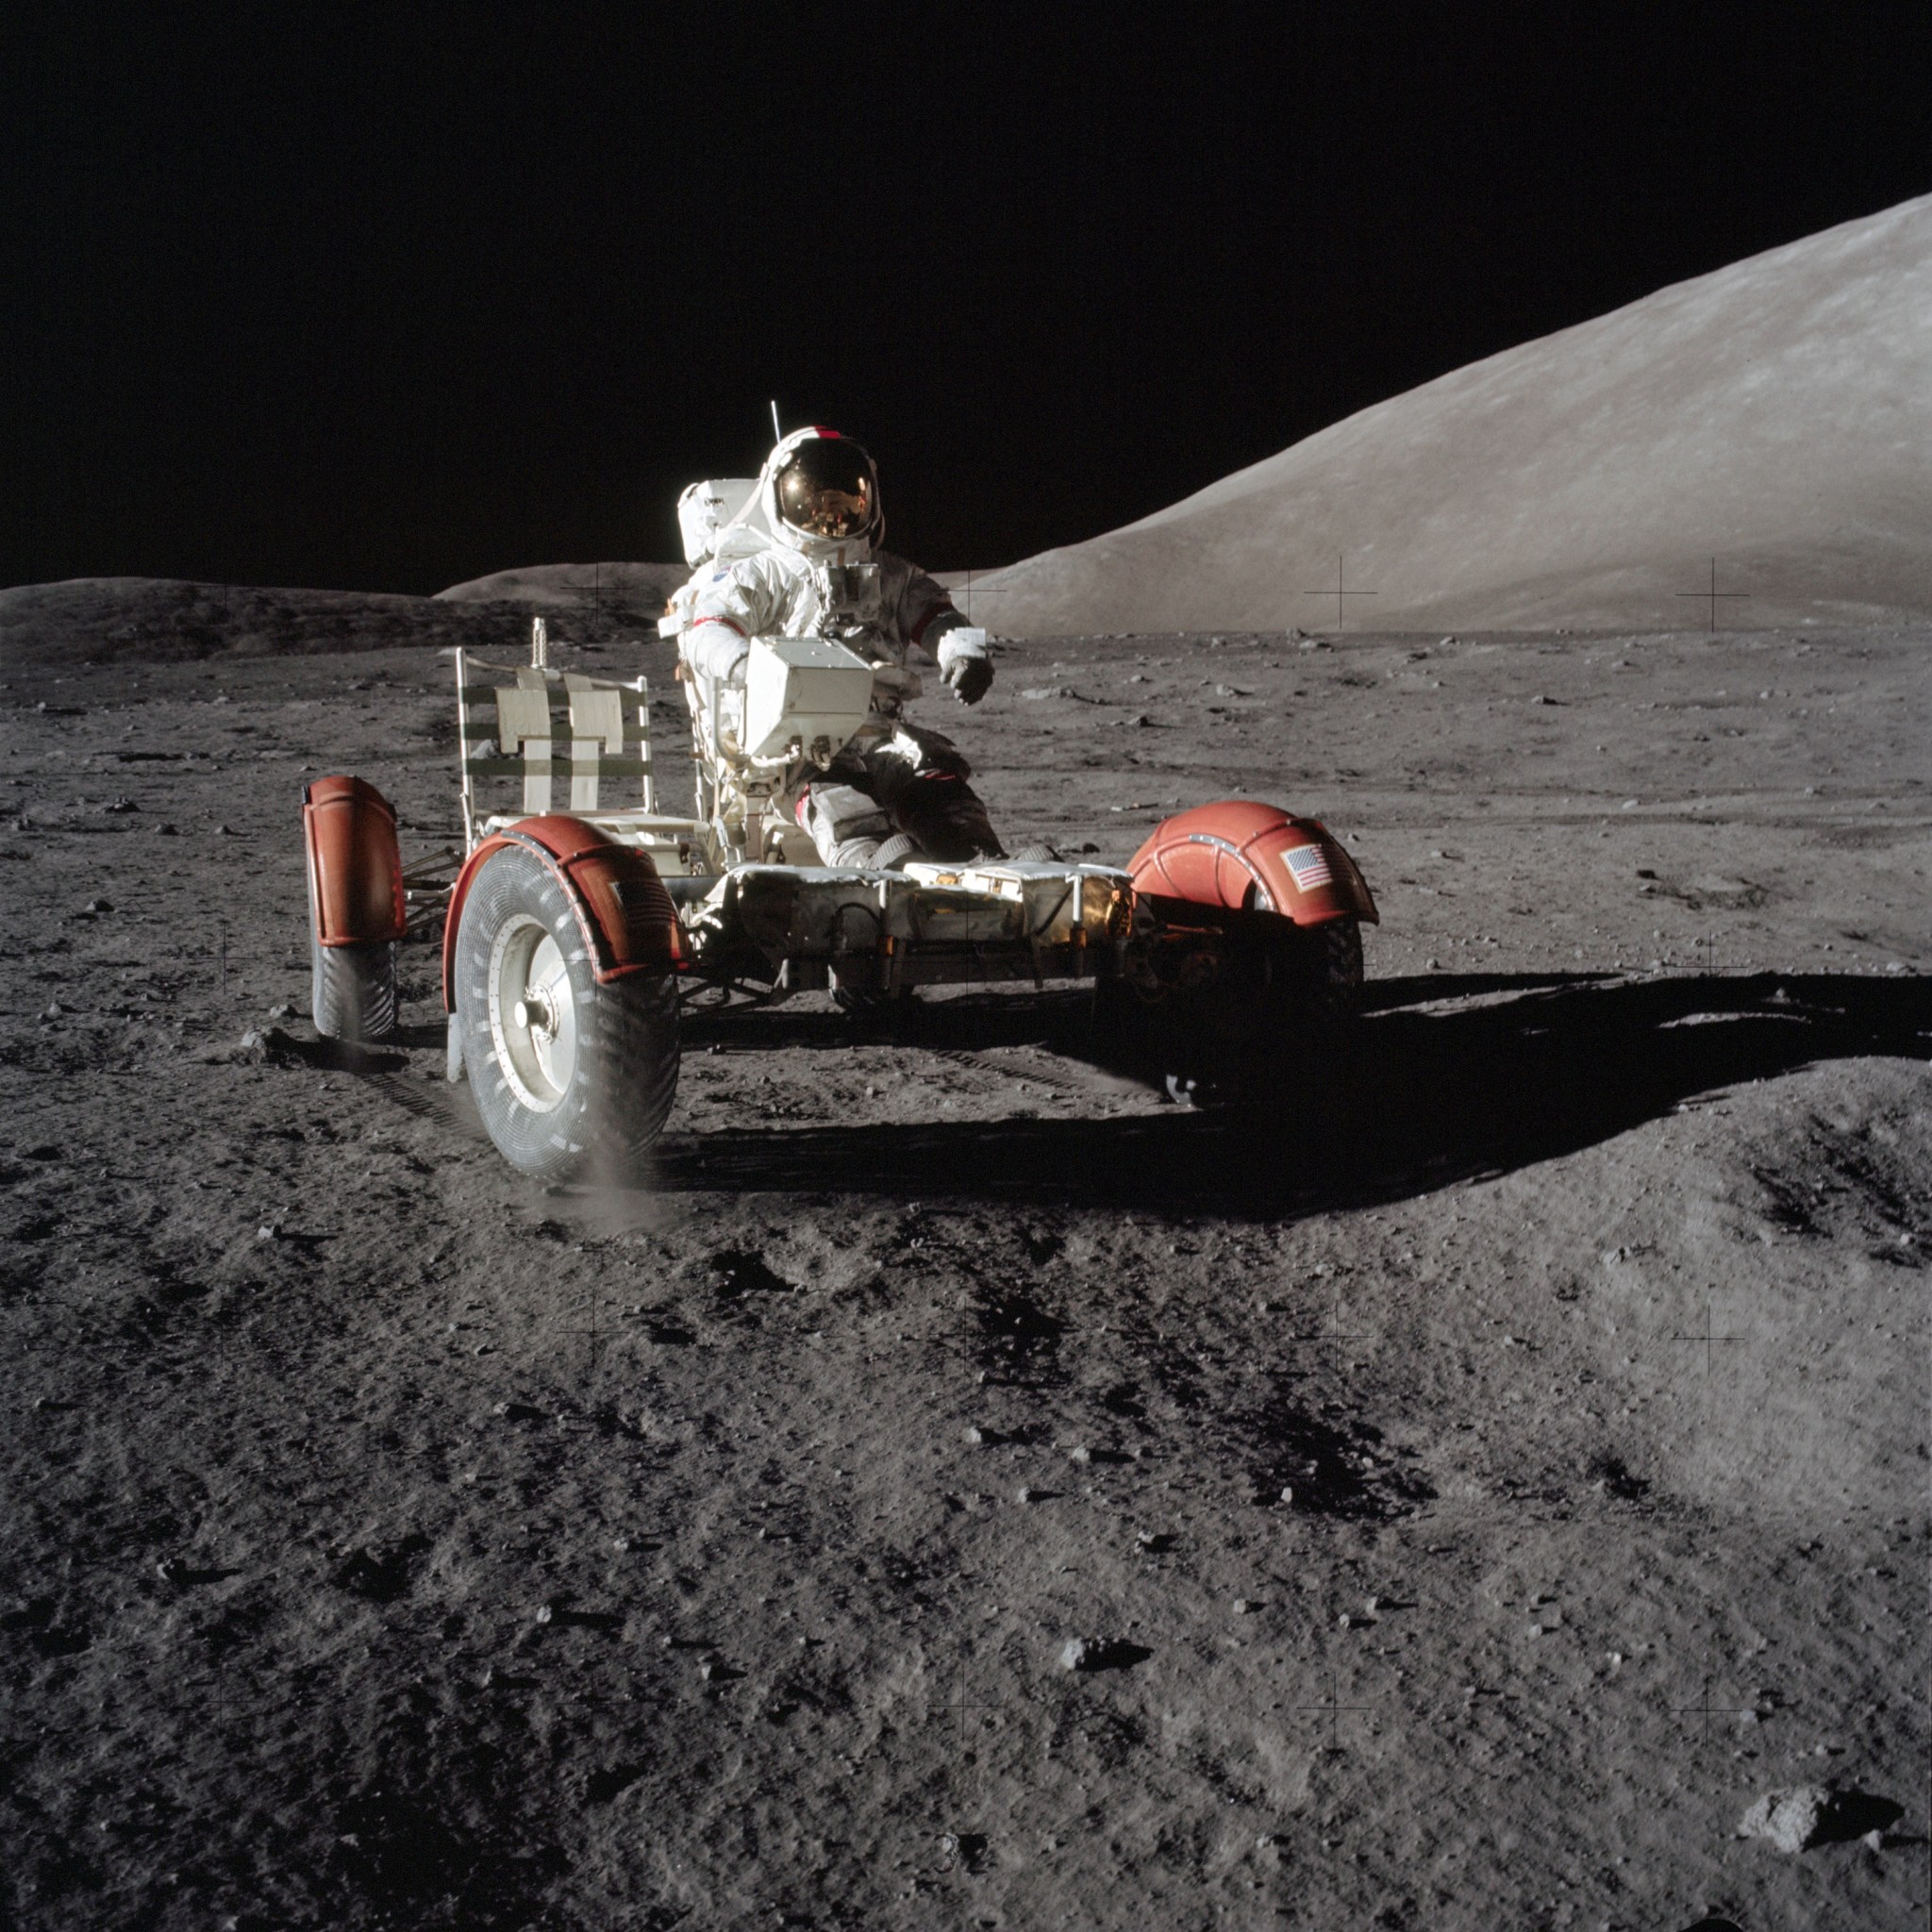 This week in 1972, Apollo 17 landed on the lunar surface.